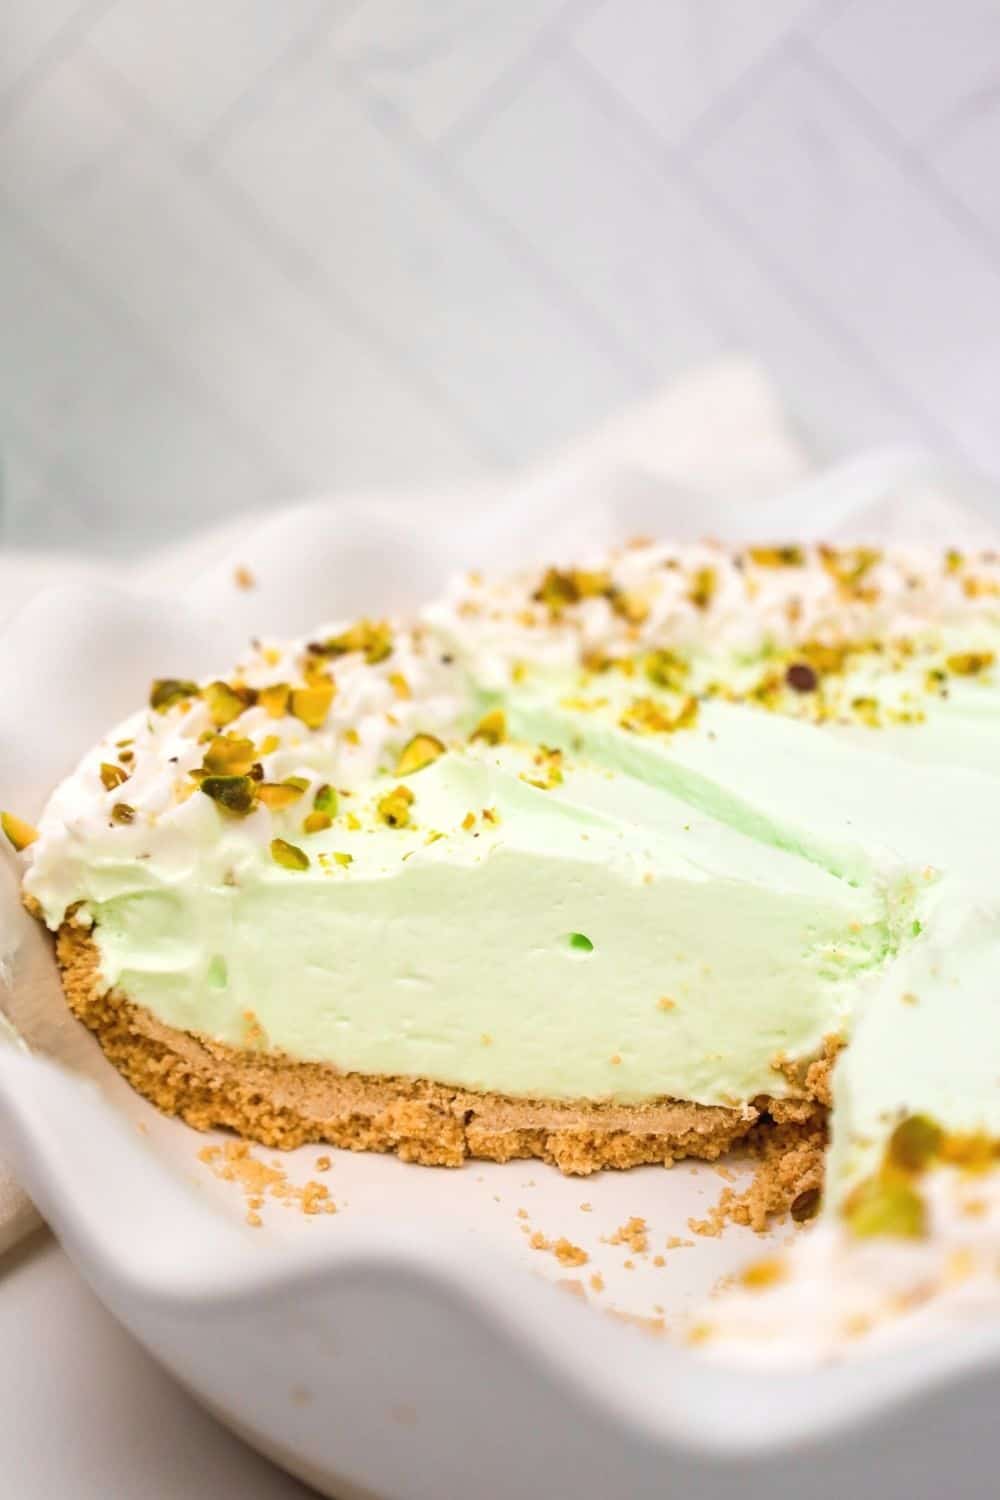 close-up side view of pistachio cream pie in a dish, garnished with whipped cream and chopped pistachios